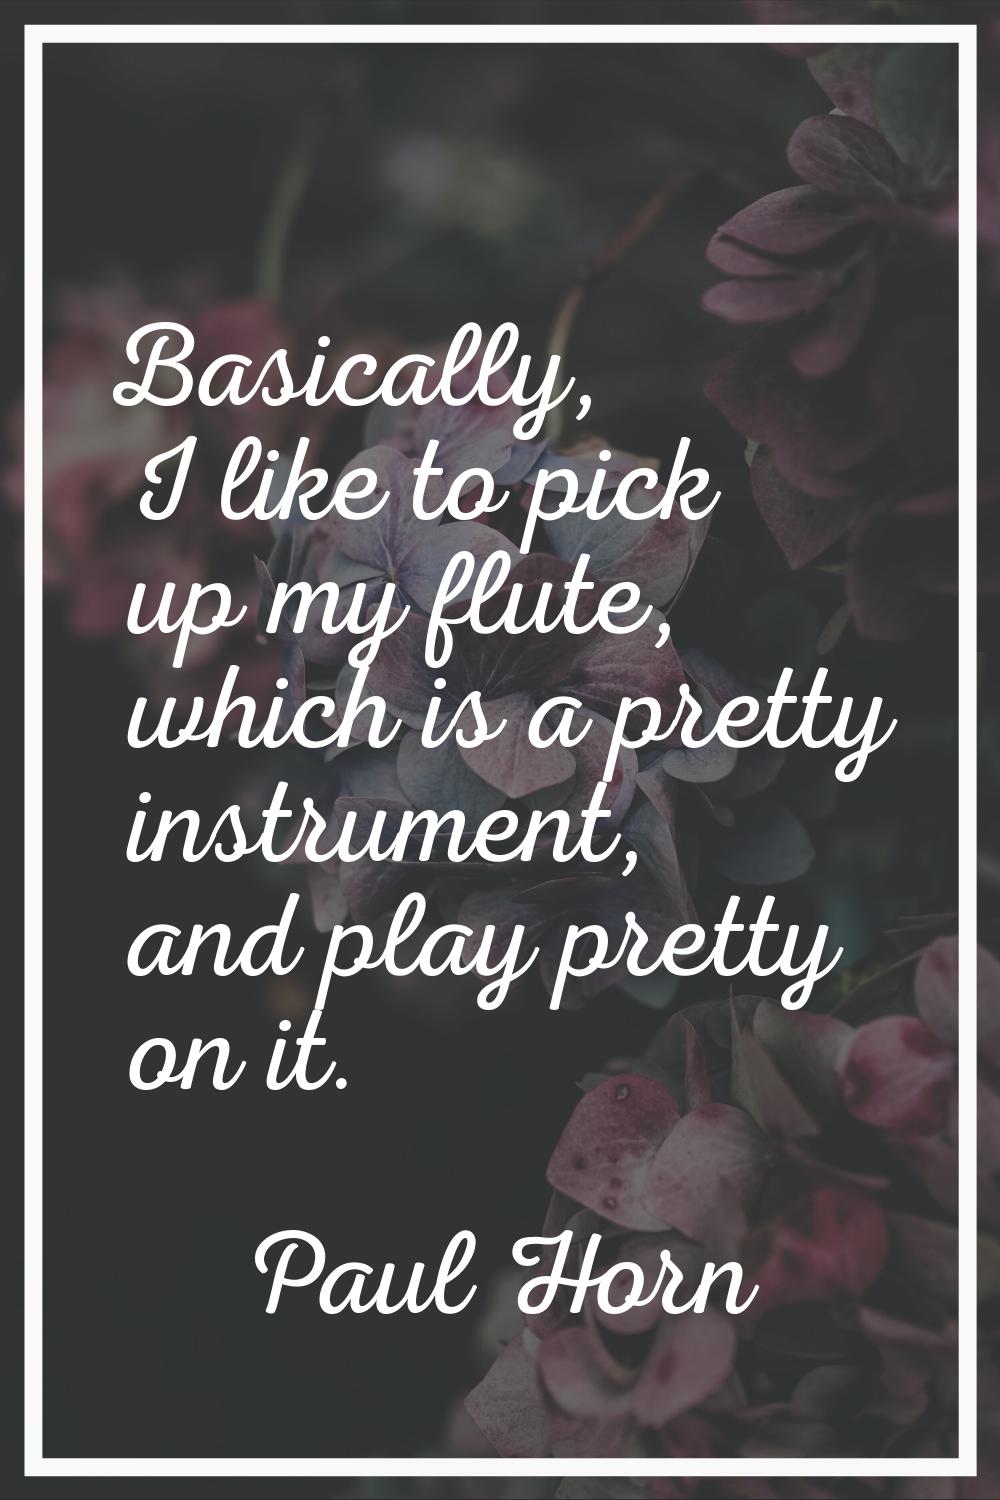 Basically, I like to pick up my flute, which is a pretty instrument, and play pretty on it.